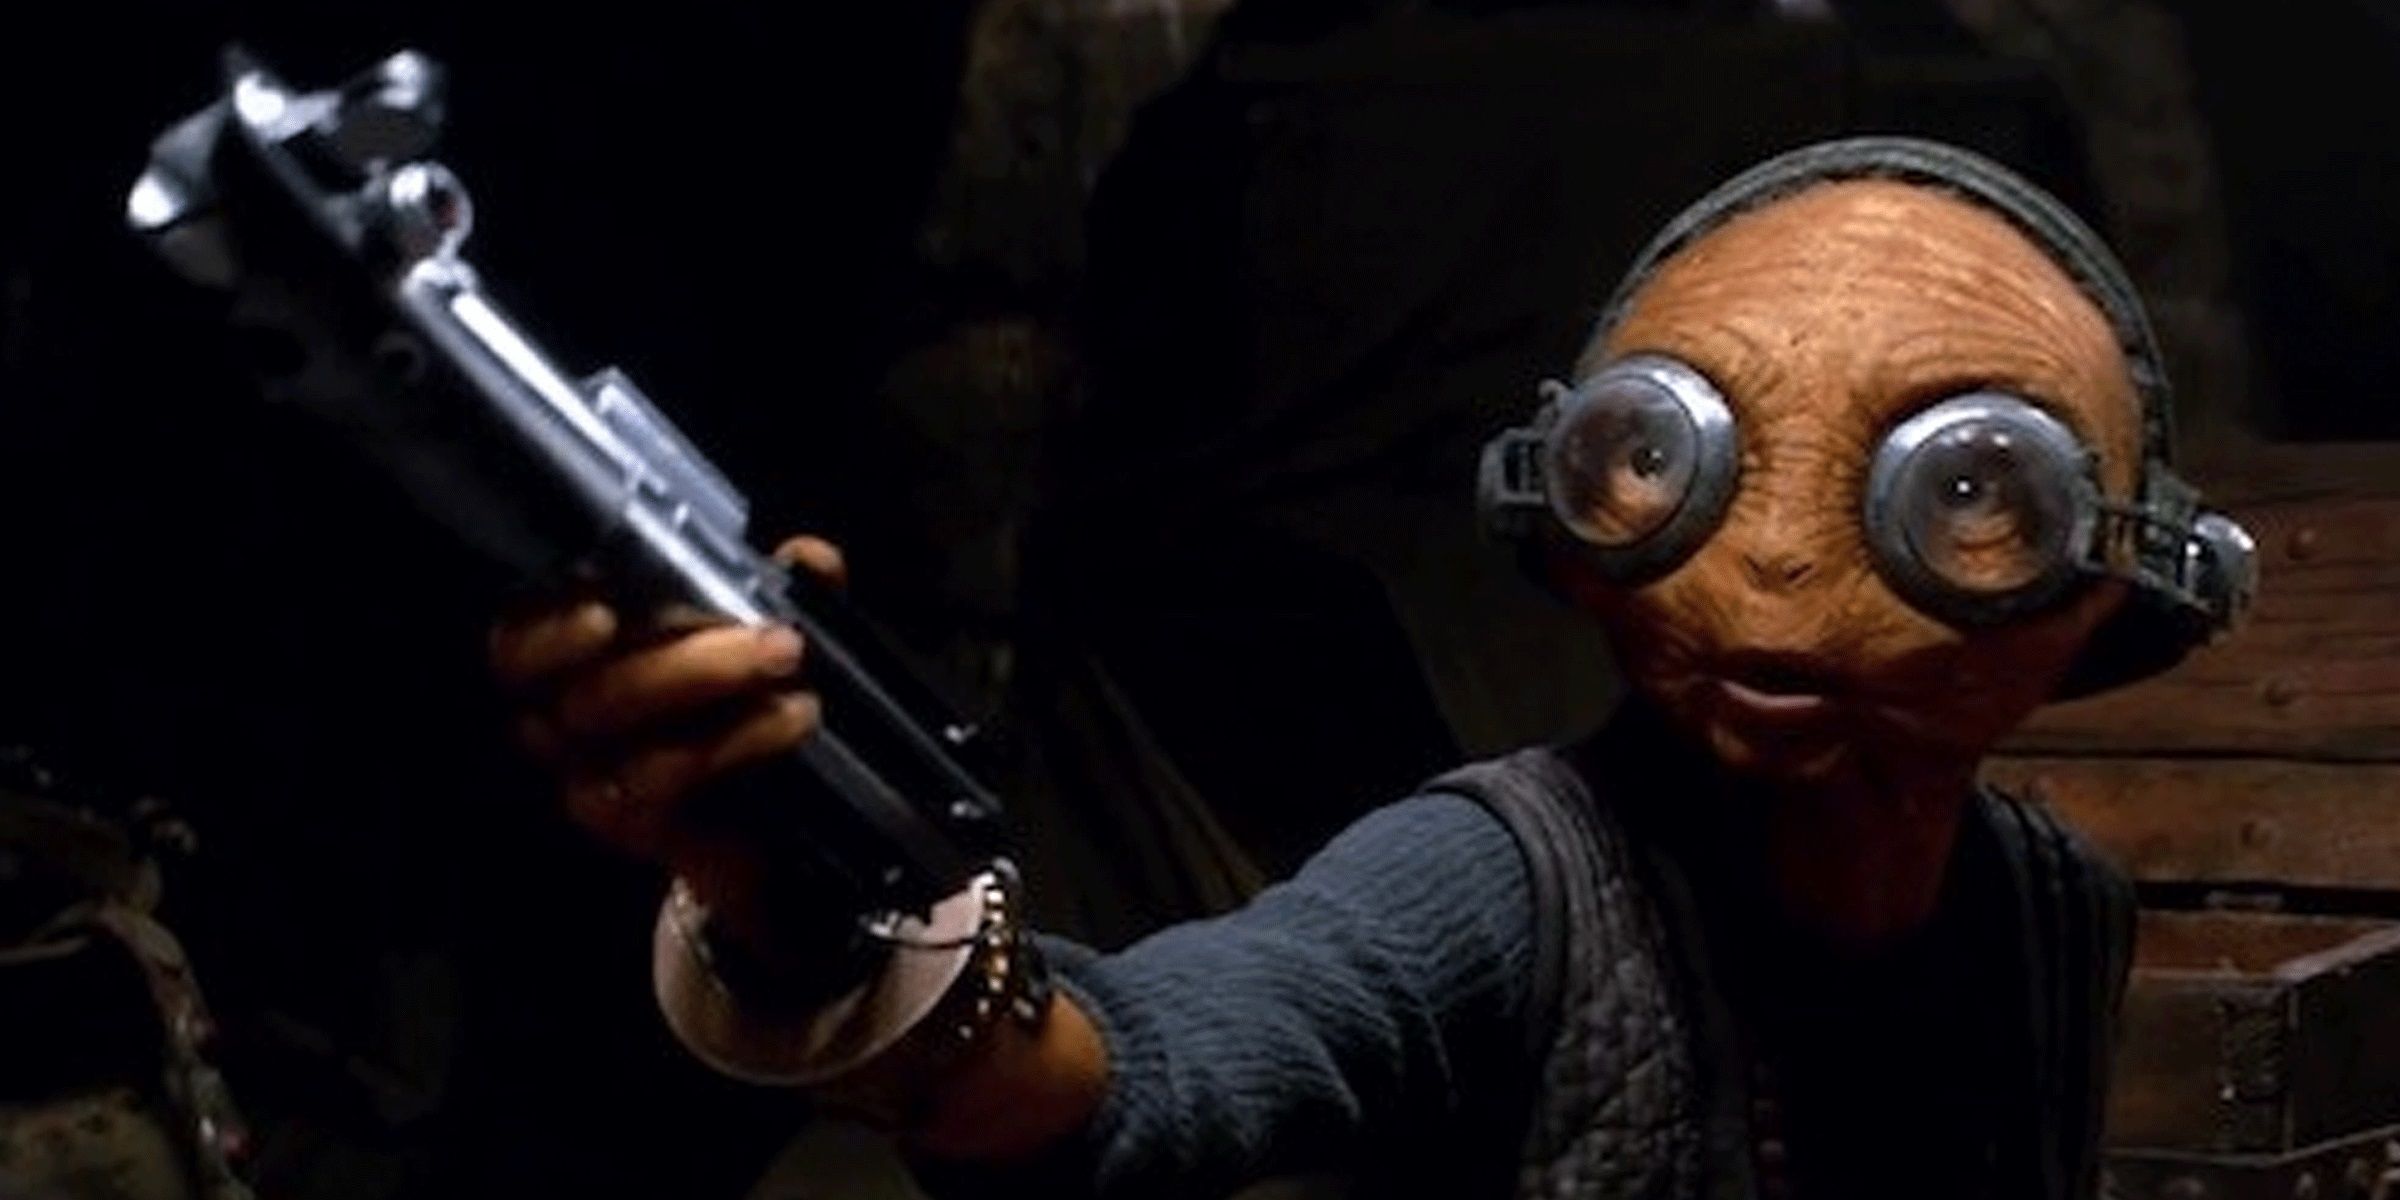 Maz Kanata with a lightsaber in Star Wars The Force Awakens